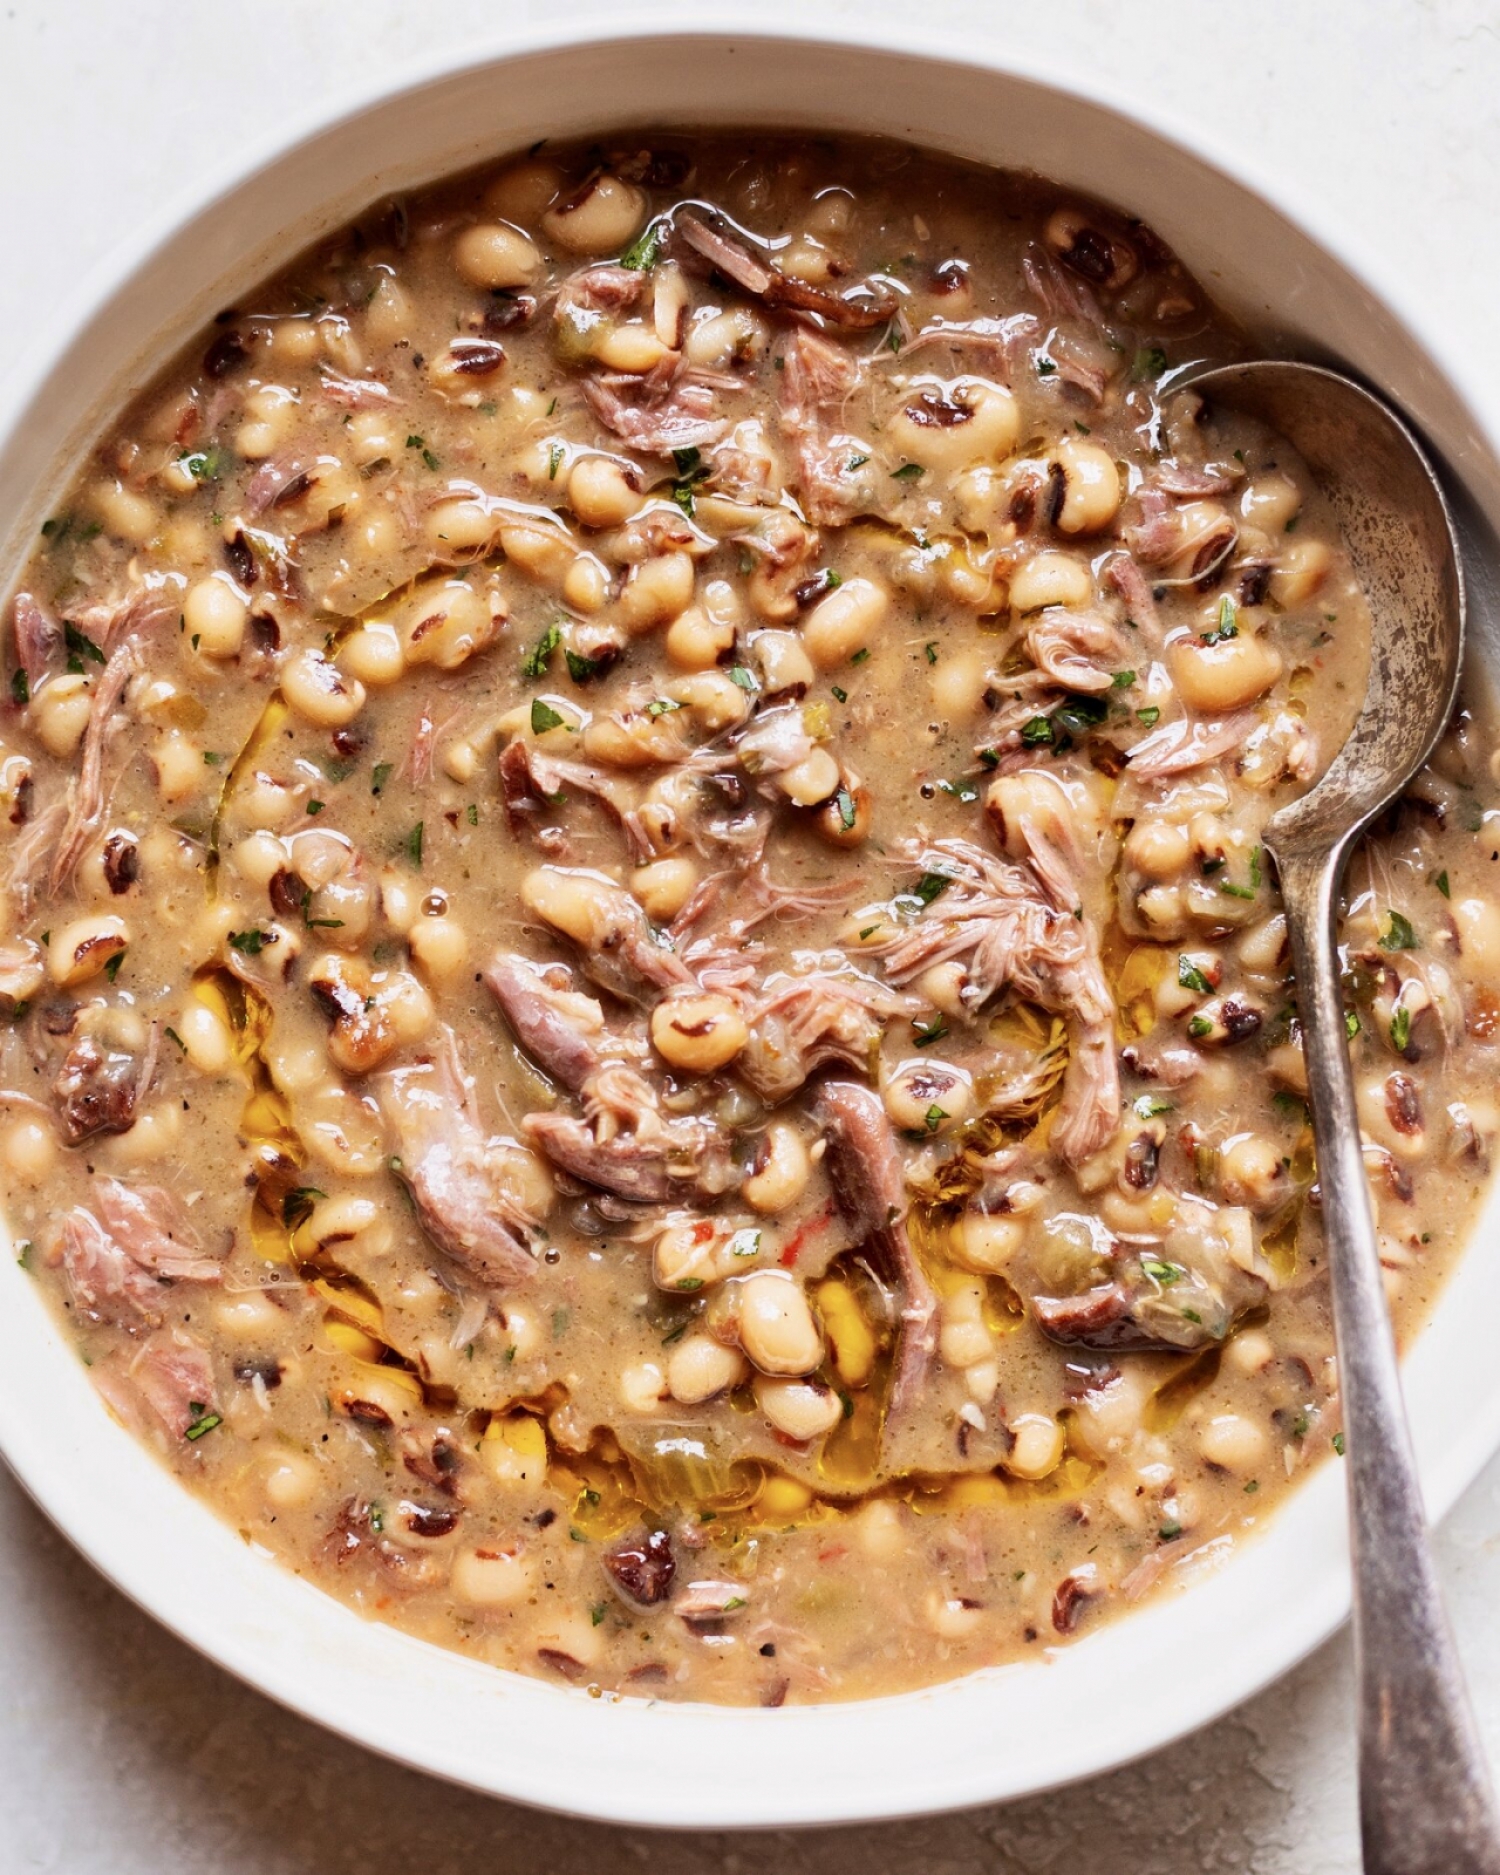 <p>Here's another comforting Southern dish to make with black-eyed peas. It's got smoked turkey, Cajun spices and the holy trinity of vegetables (bell pepper, onion and celery) for those classic Louisiana flavors. Even better, it can be made in the Instant Pot or pressure cooker in under an hour. <a href="https://www.thedaleyplate.com/blog/creamy-black-eyed-peas" rel="noopener">Get the recipe here.</a></p>